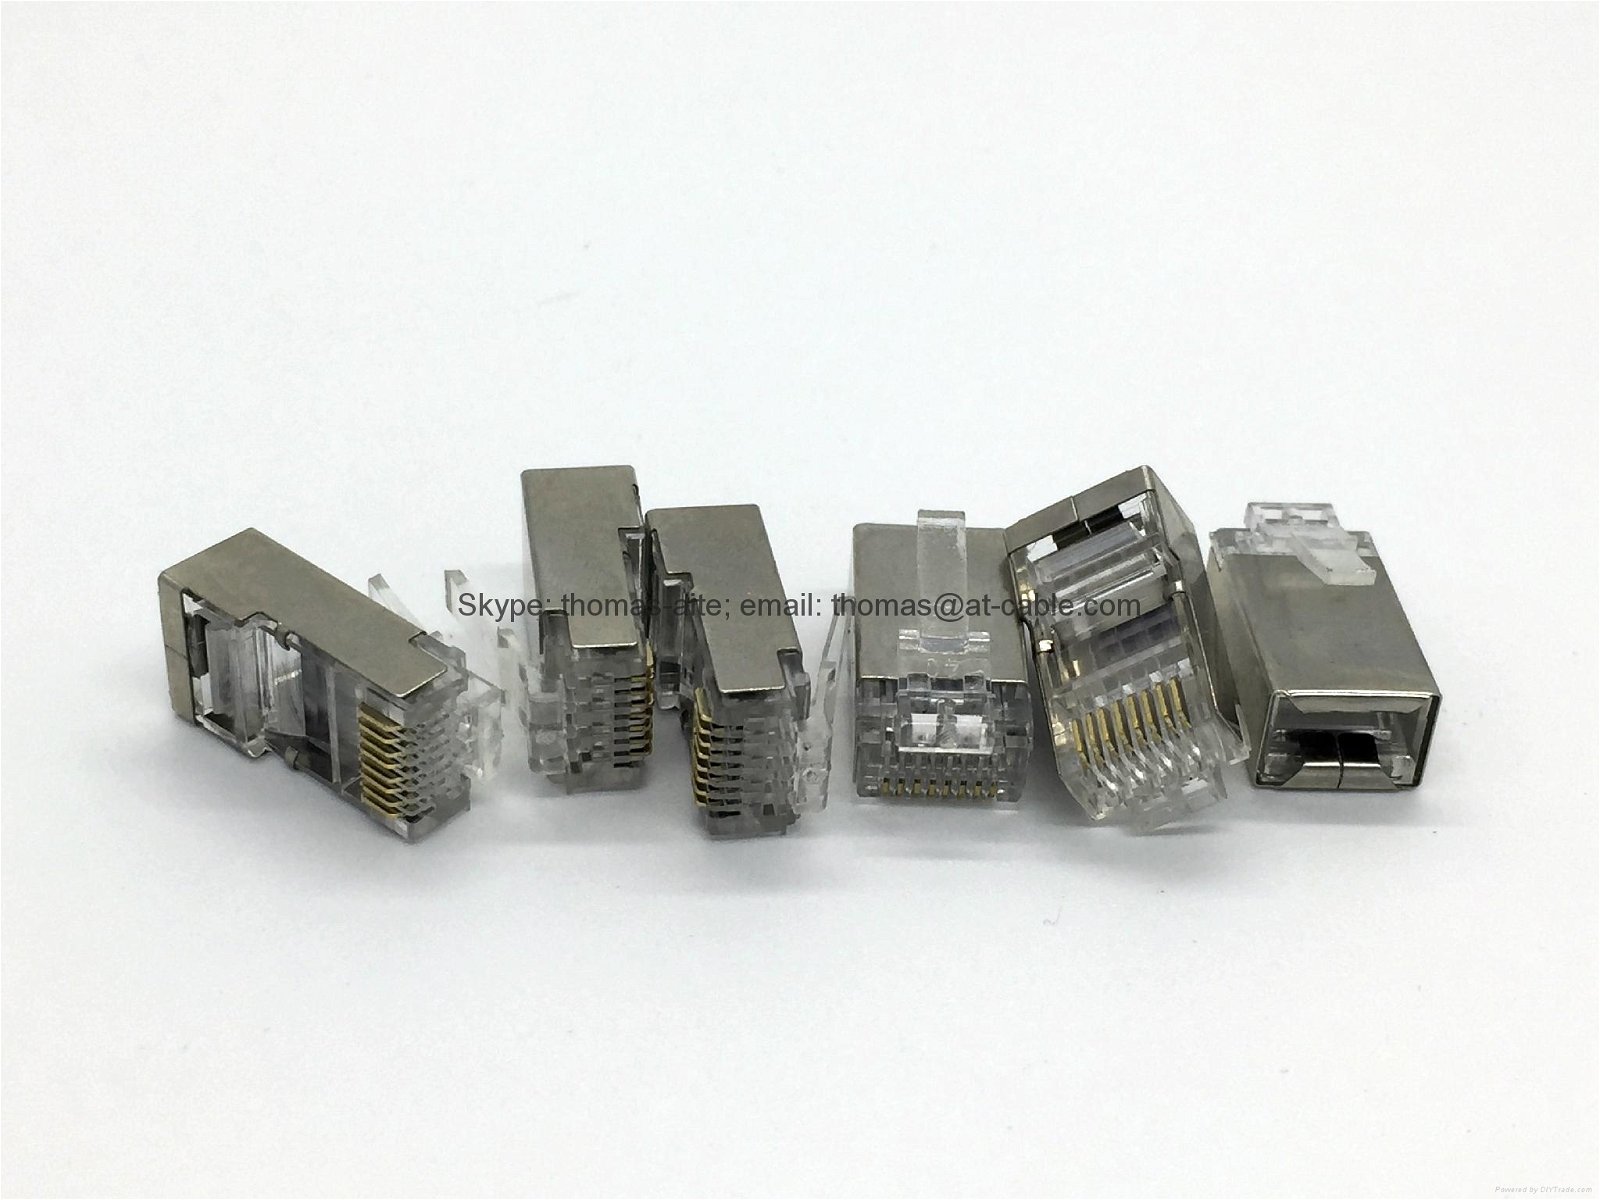  shielded CAT5E/ CAT6 connector with a hole in front